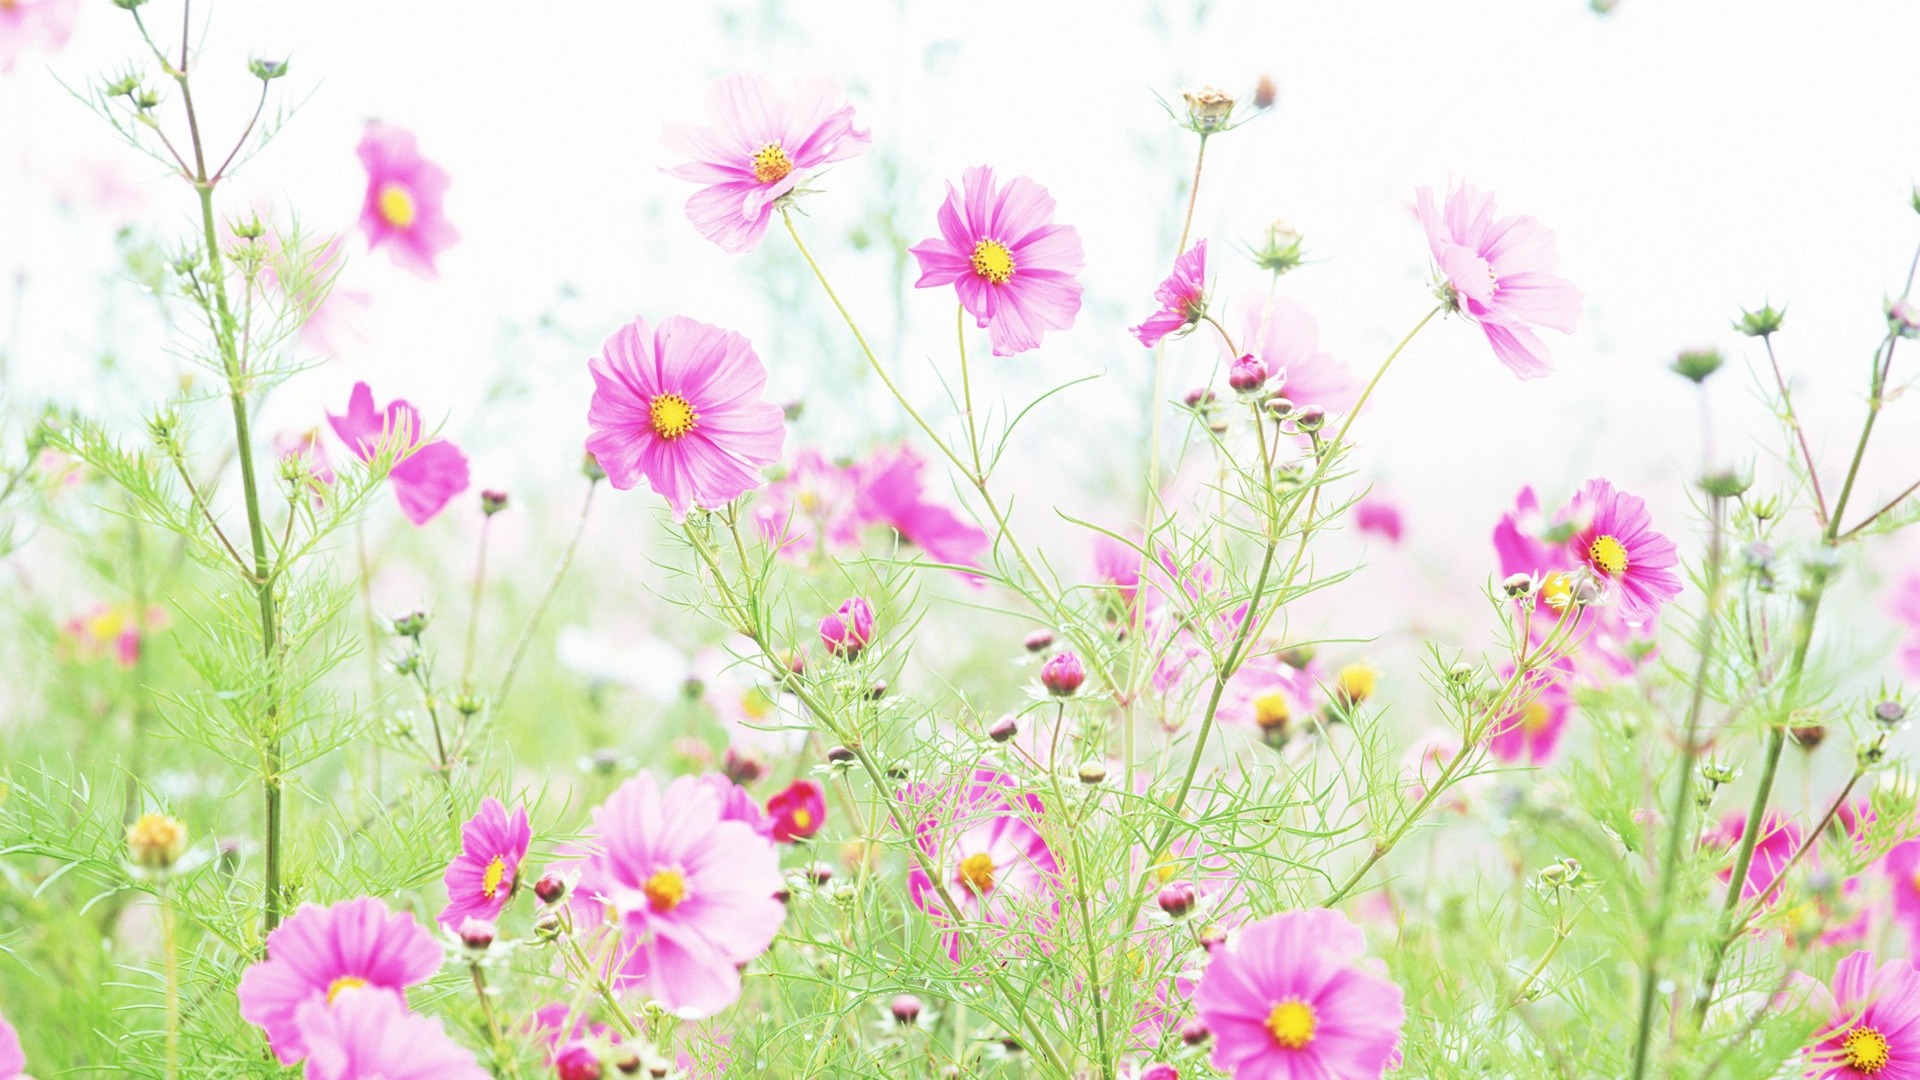 Fresh style Flowers Wallpapers #3 - 1920x1080